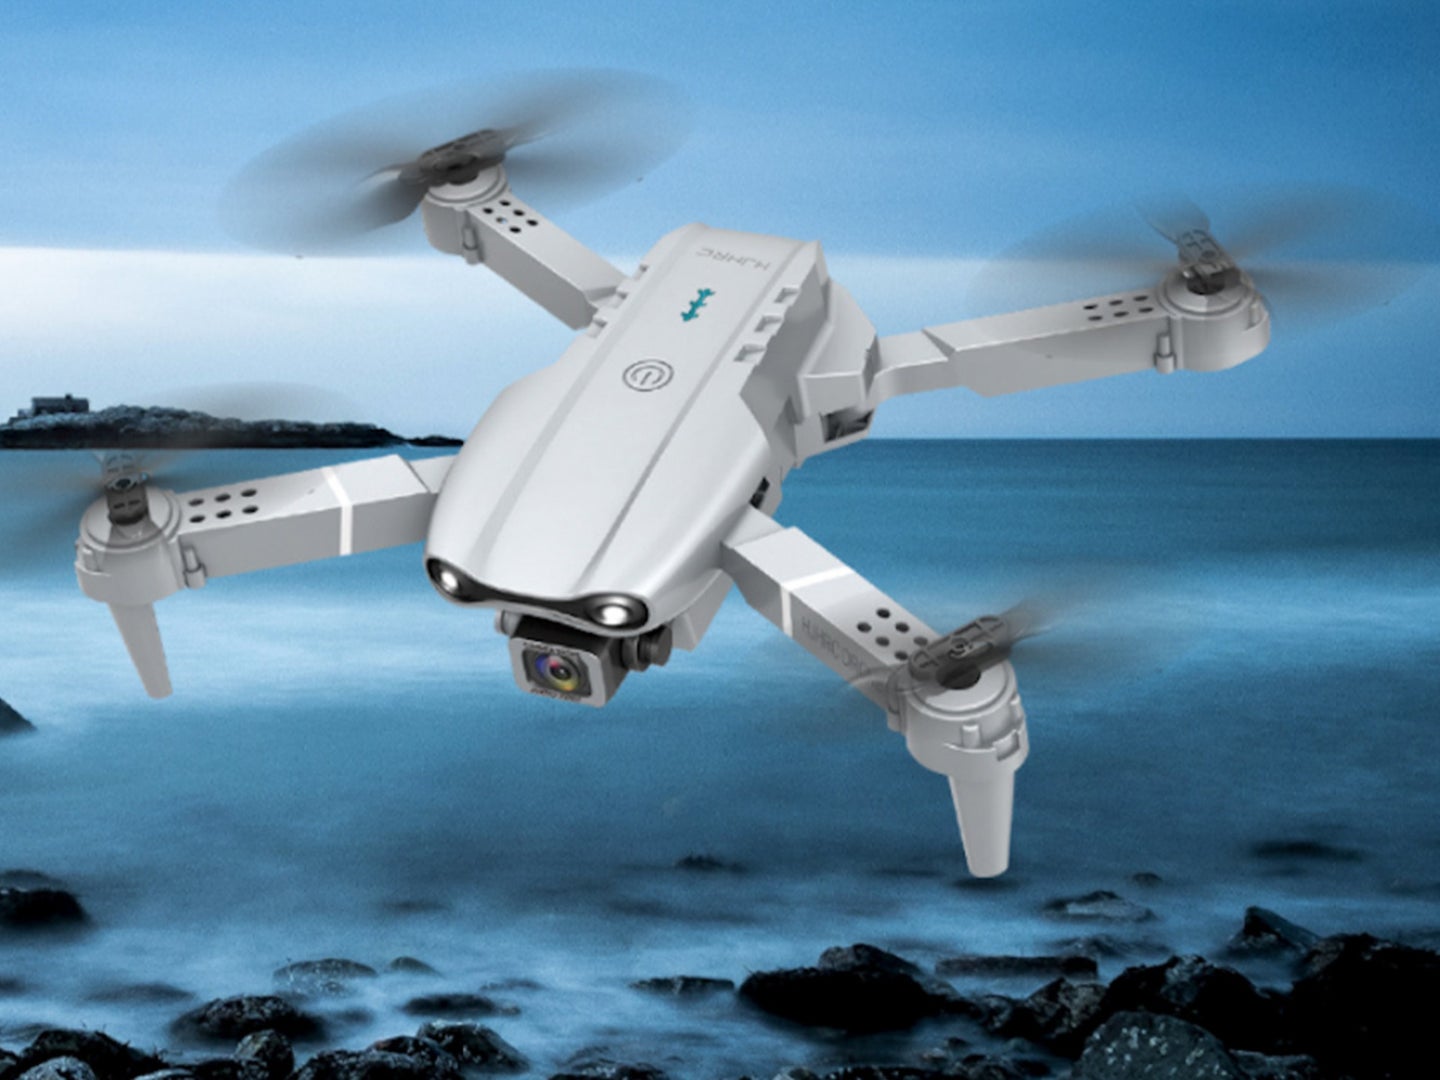 Get a bird’s eye view x two with this dual-camera drone bundle